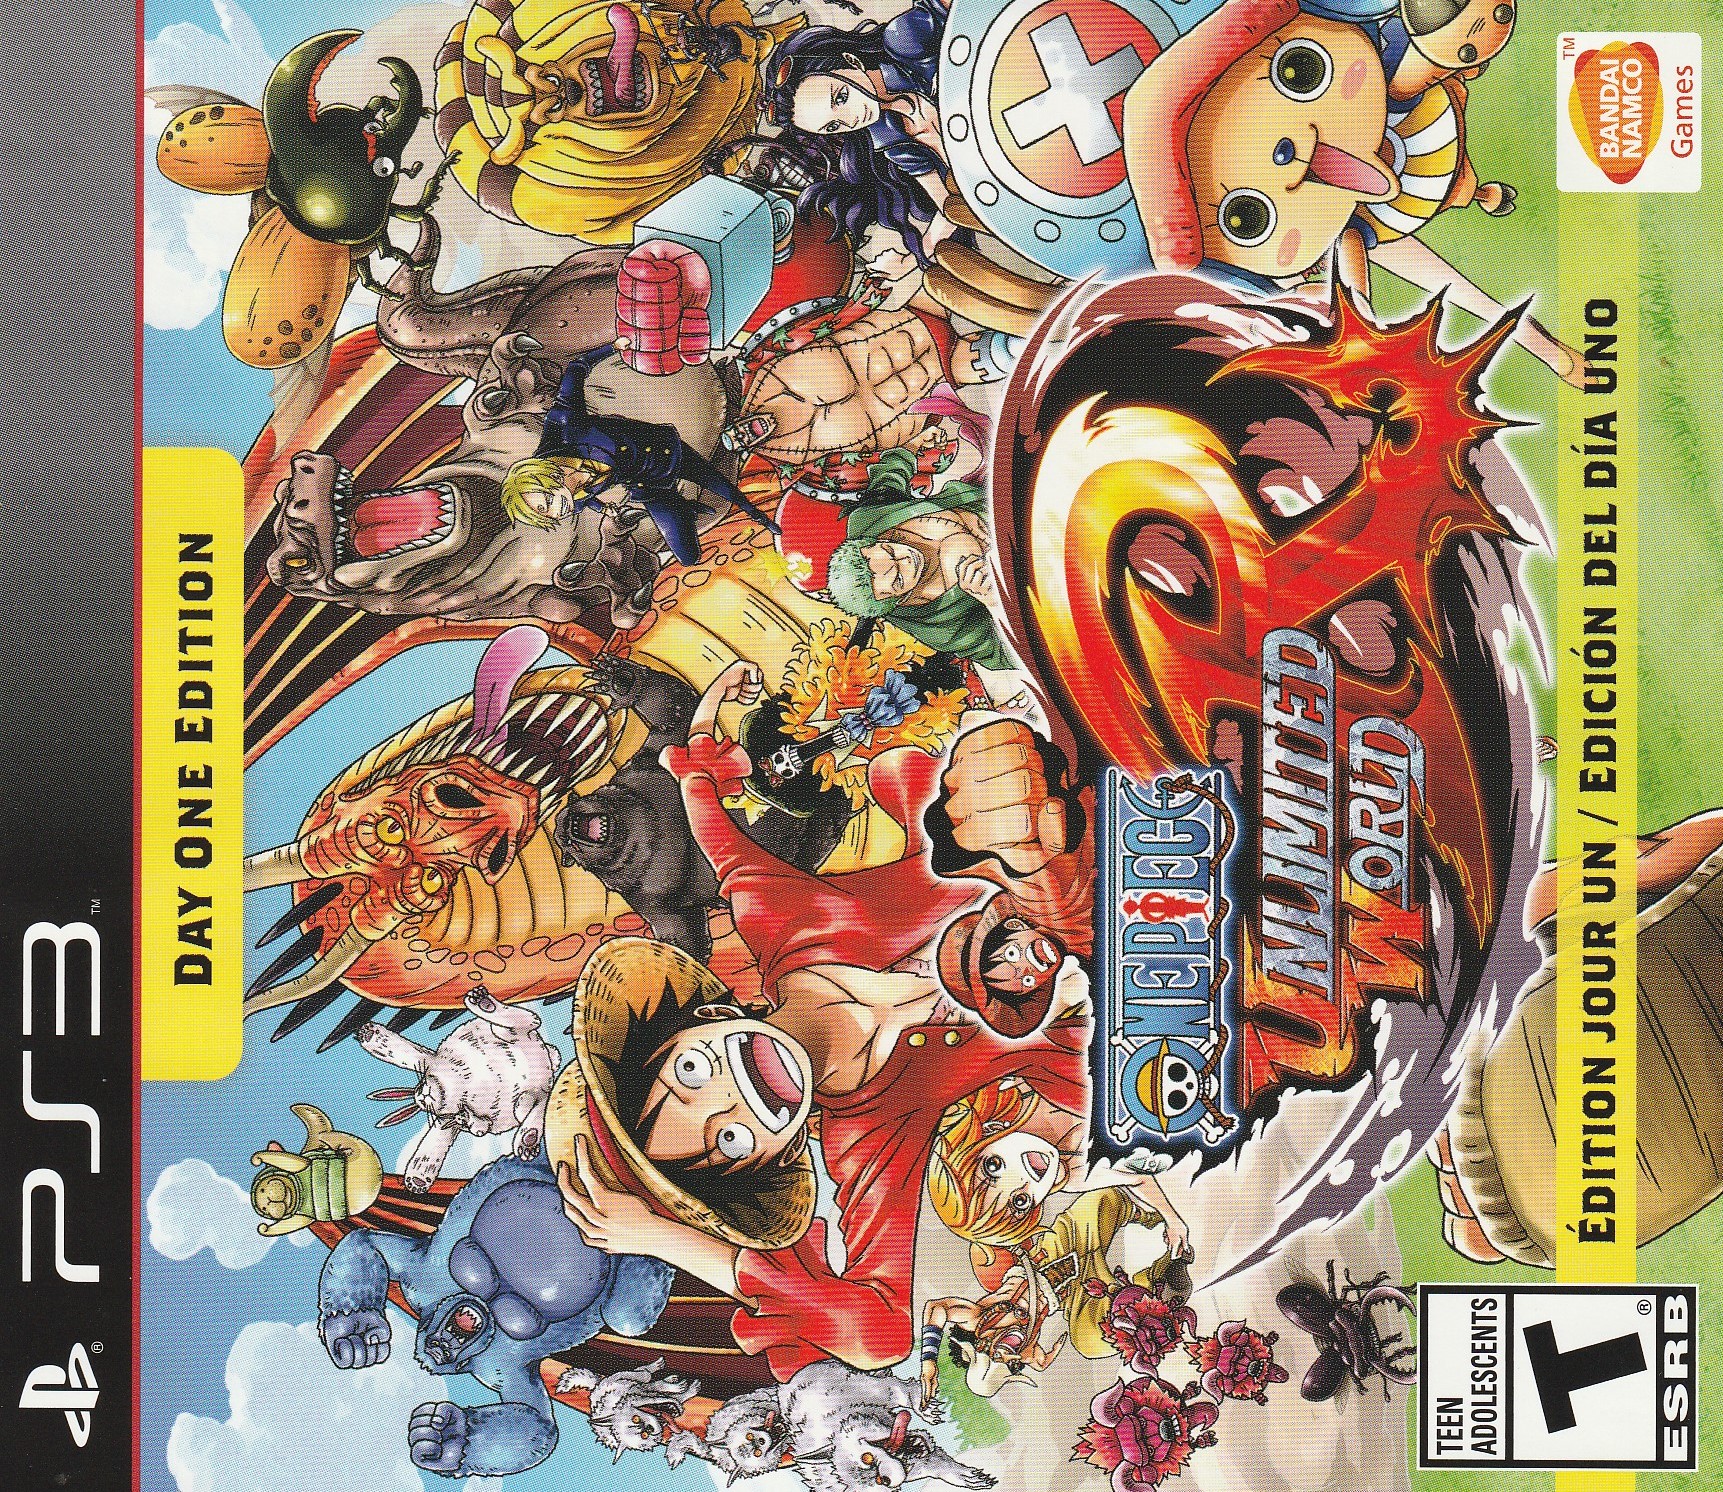 One Piece: Unlimited World Red - day one edition [Bandai Namco Games]